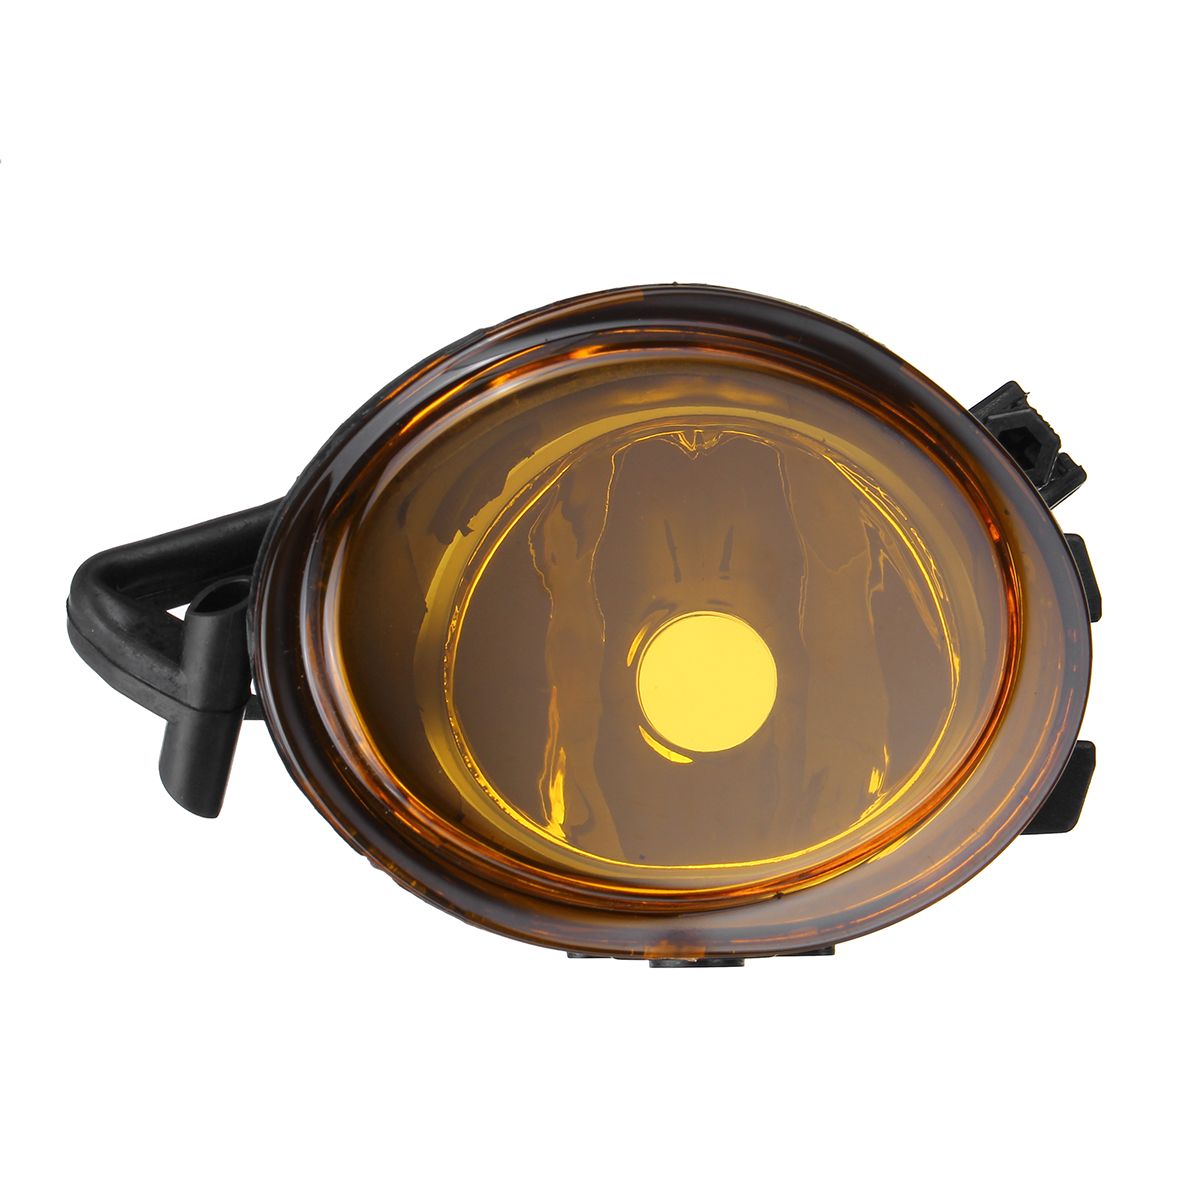 Car-Front-Fog-Lights-Yellow-Replacement-for-BMW-E46-M3-MTECH-II-E39-M5-2001-2006-63177894017-6317789-1474115